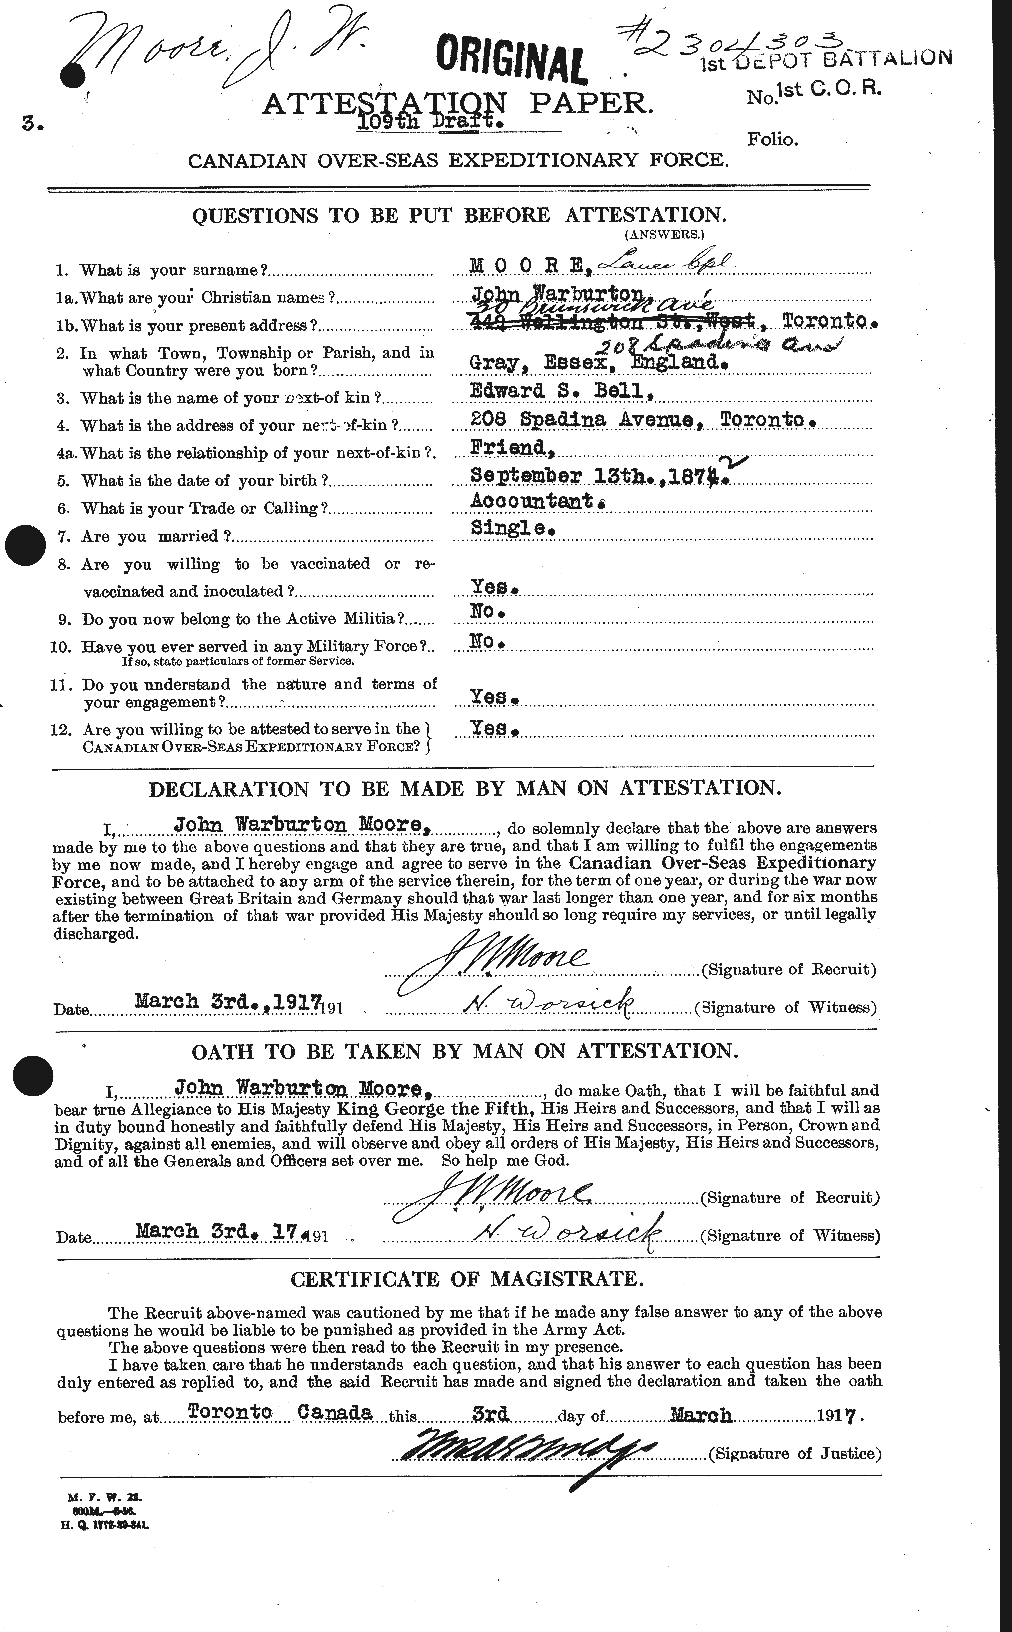 Personnel Records of the First World War - CEF 503345a